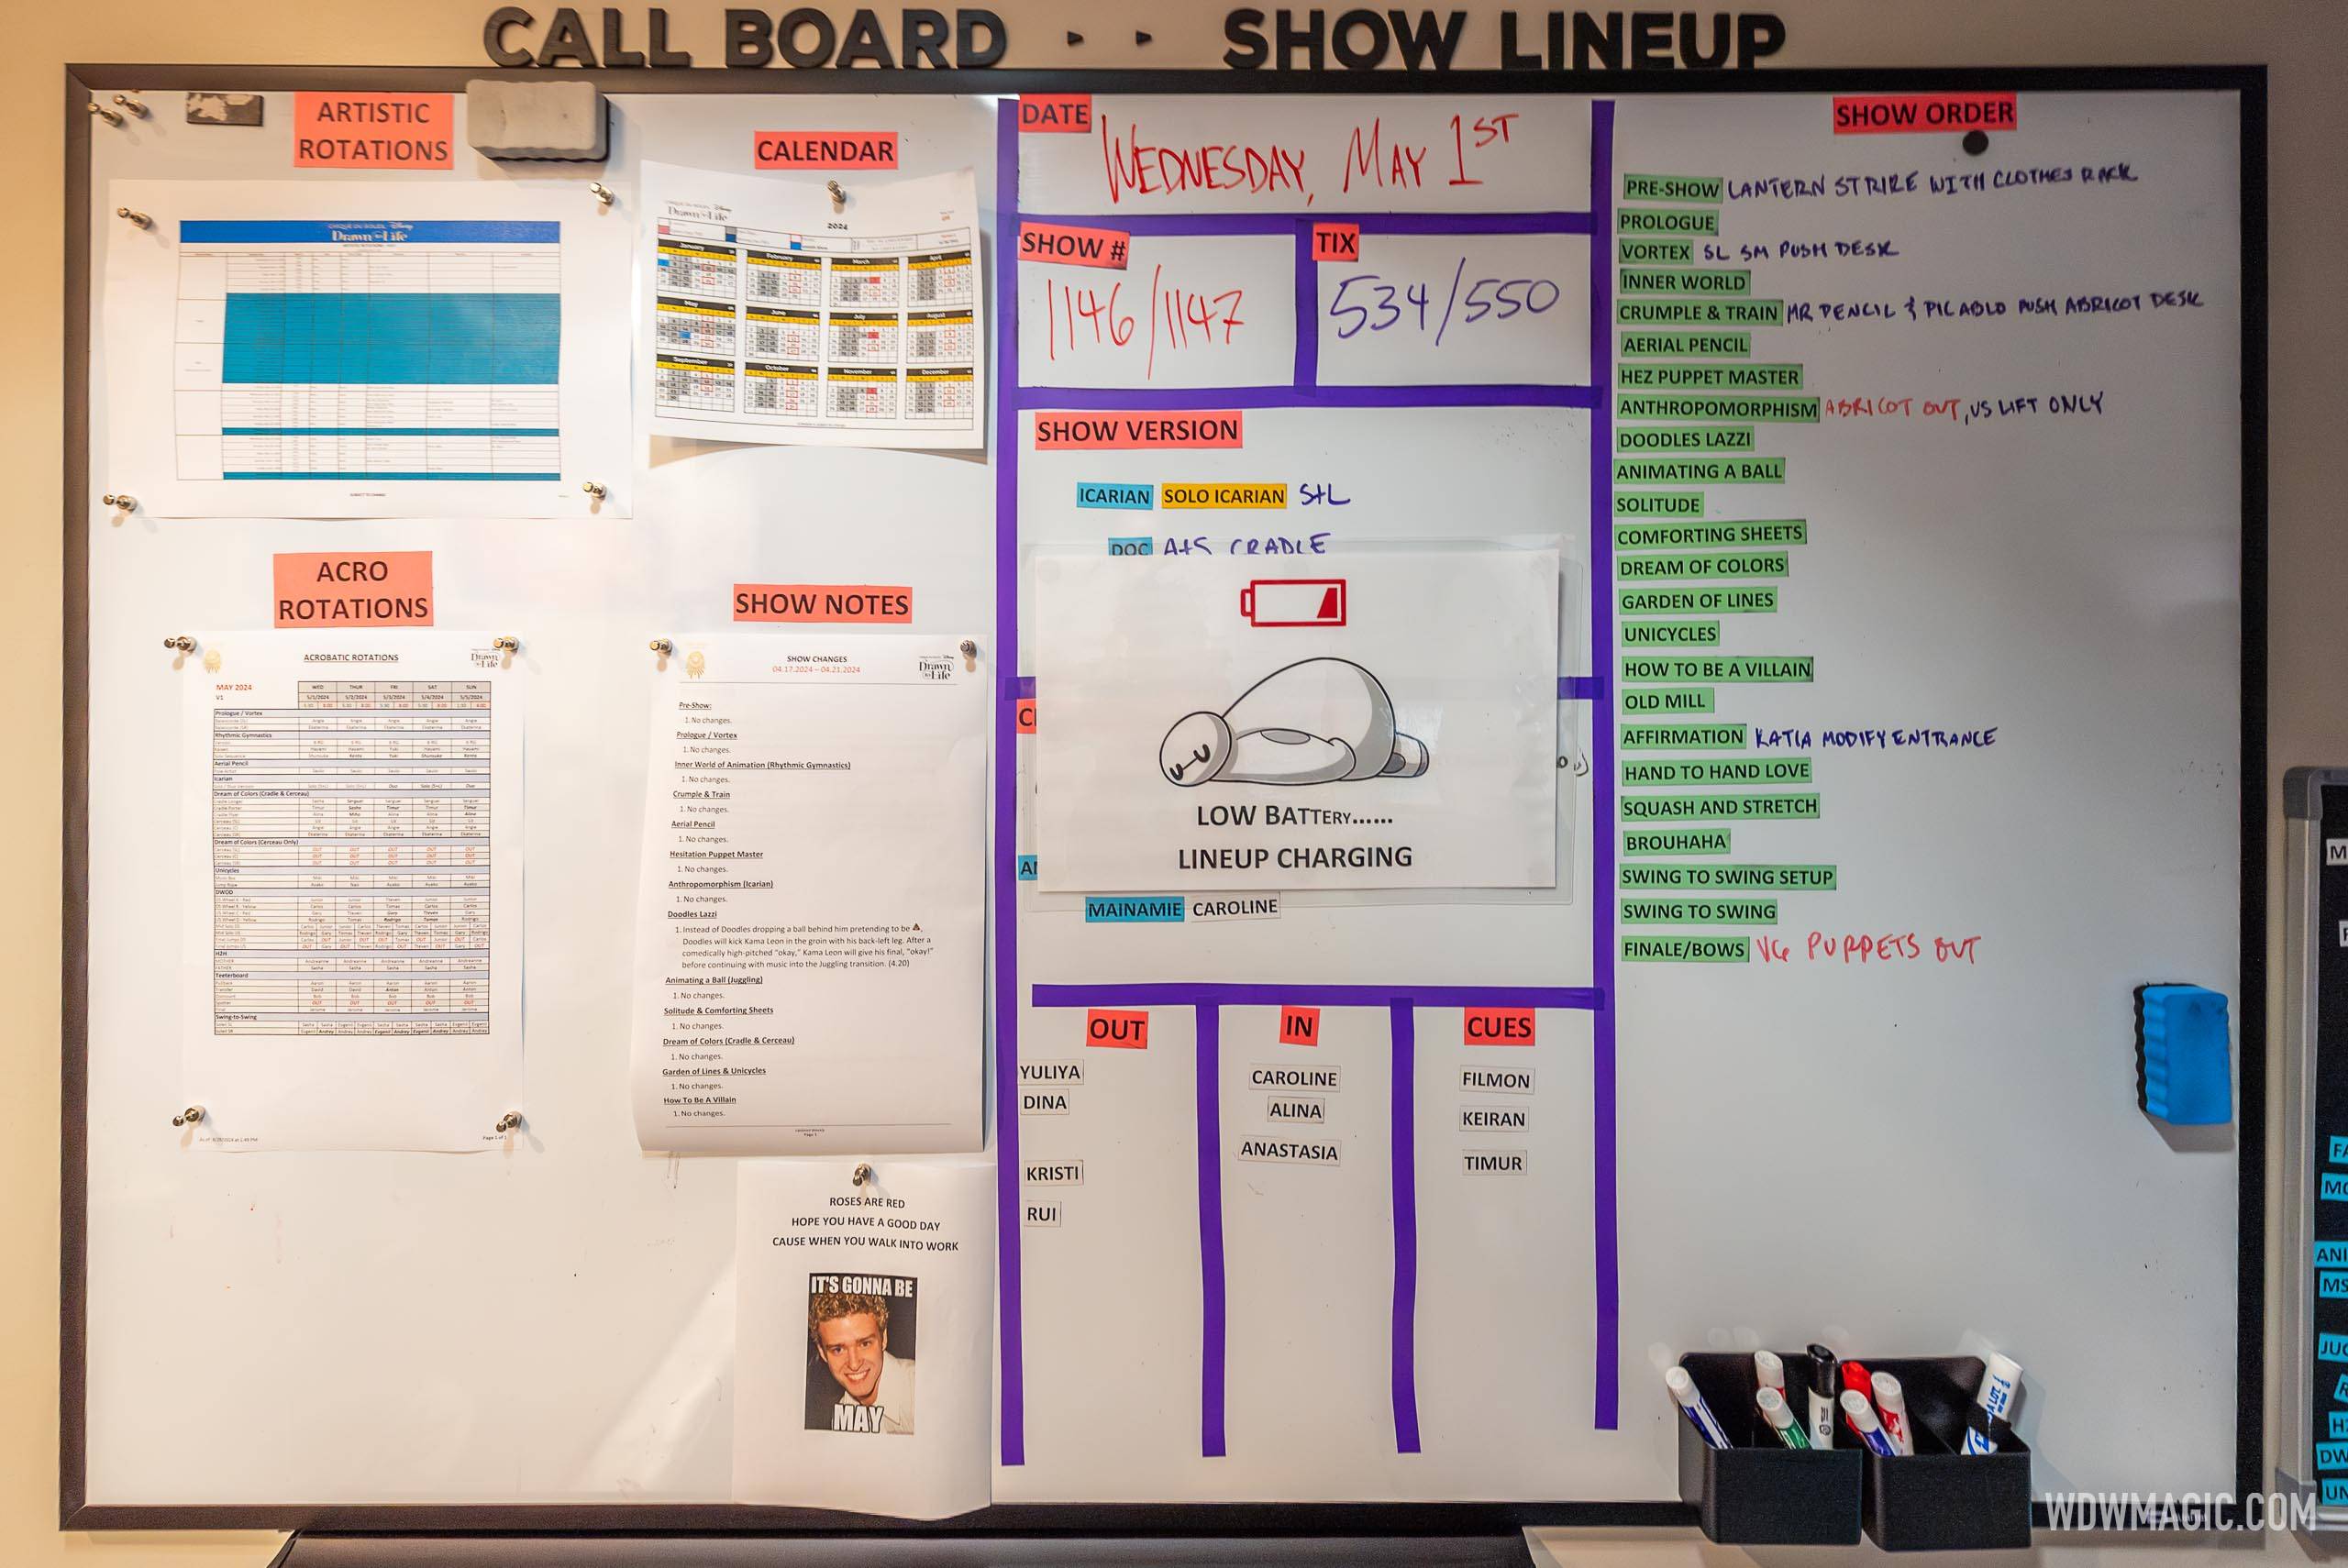 Drawn Life Call Board and Show Lineup